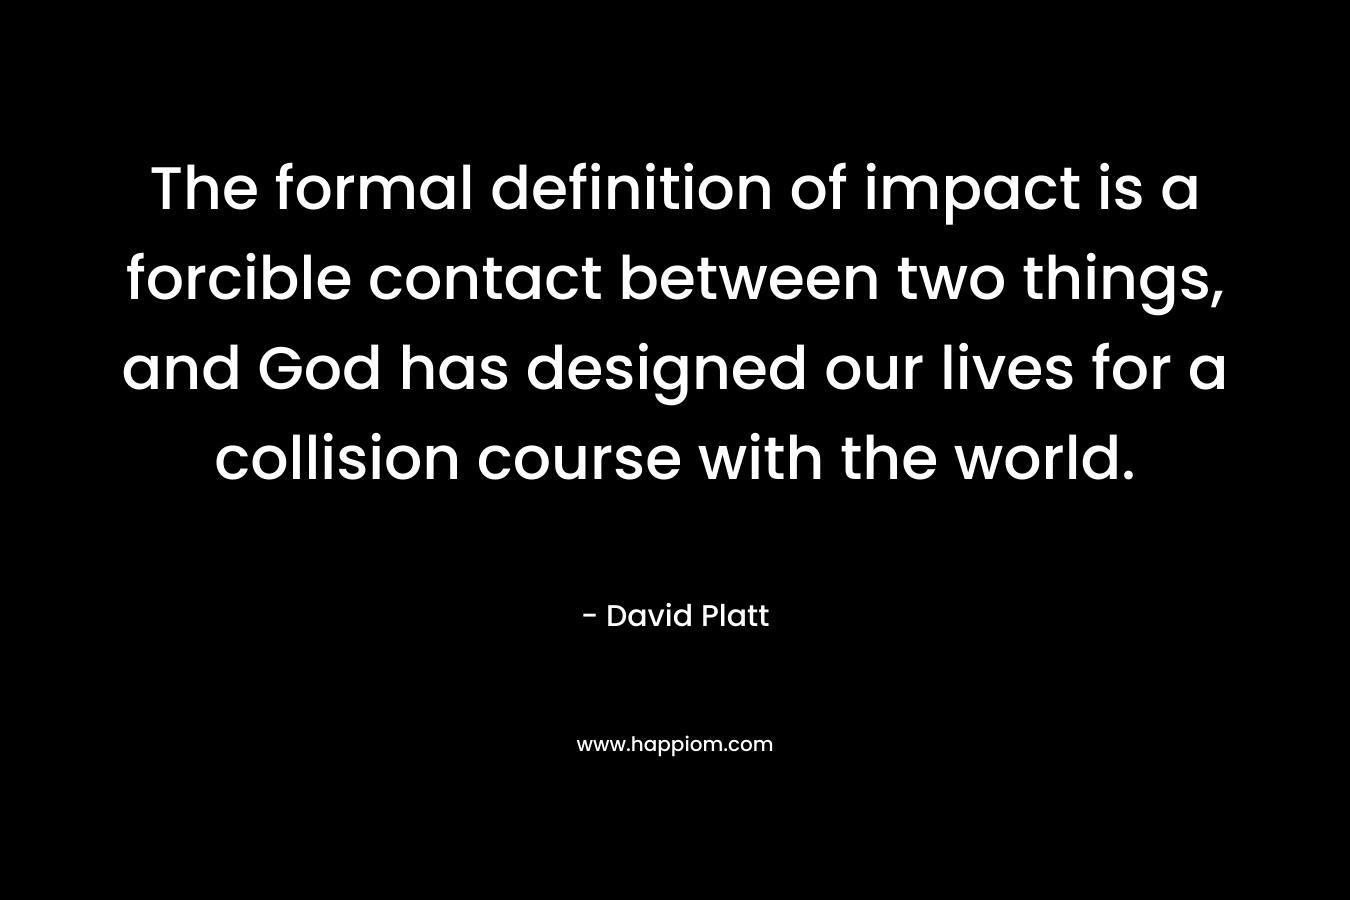 The formal definition of impact is a forcible contact between two things, and God has designed our lives for a collision course with the world. – David Platt